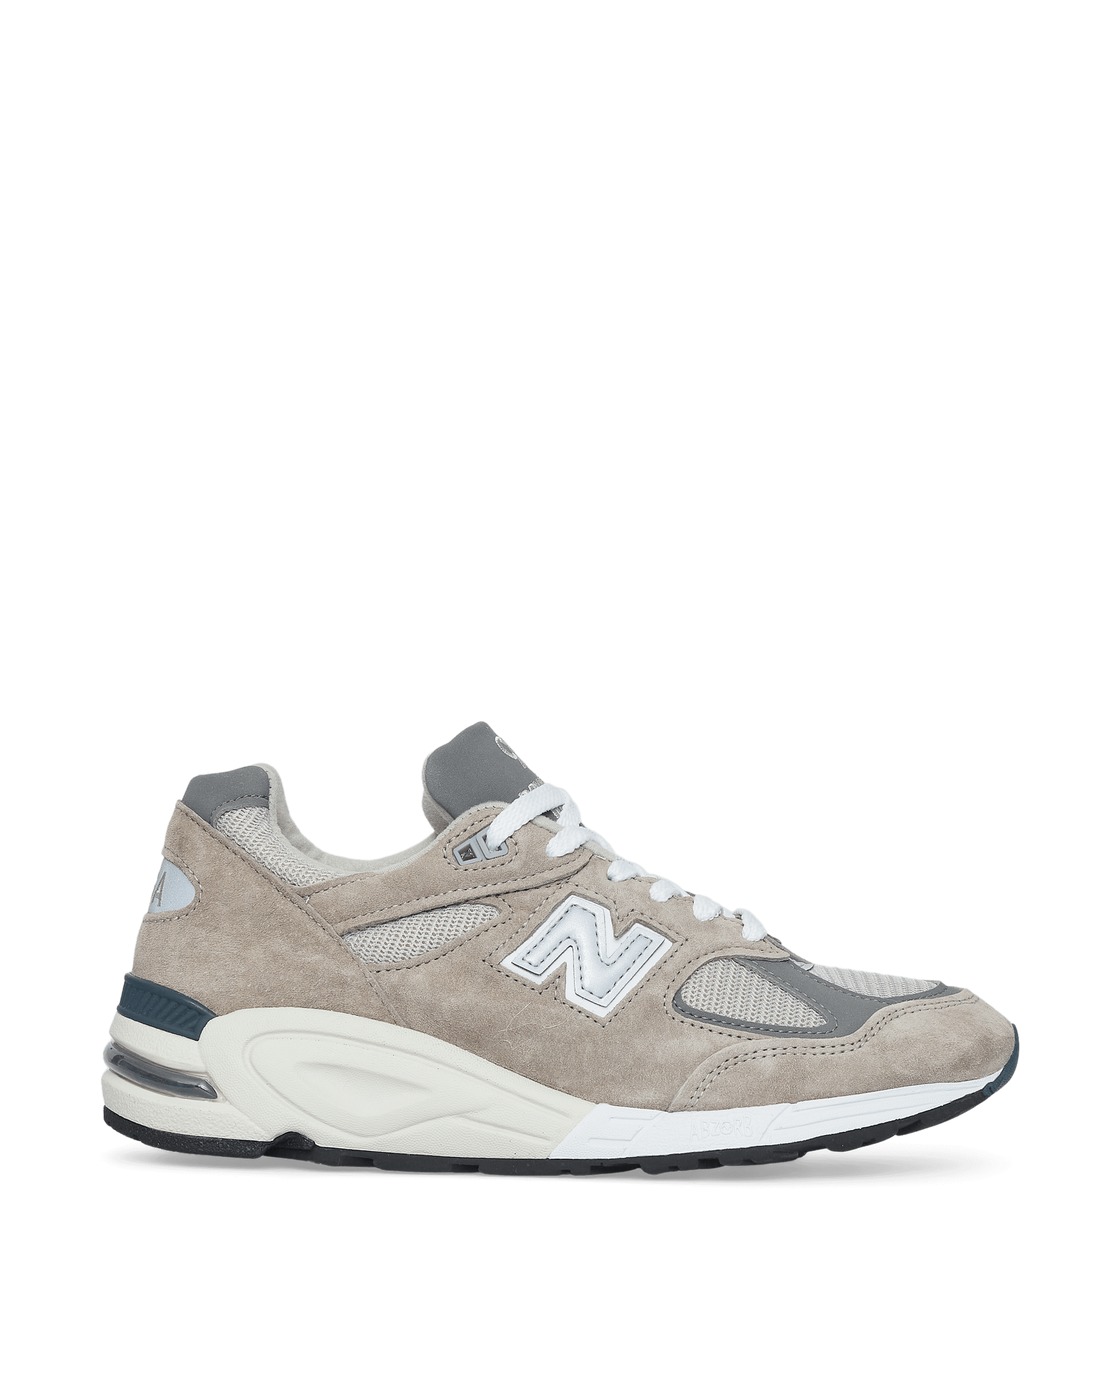 New Balance 990 Sneakers